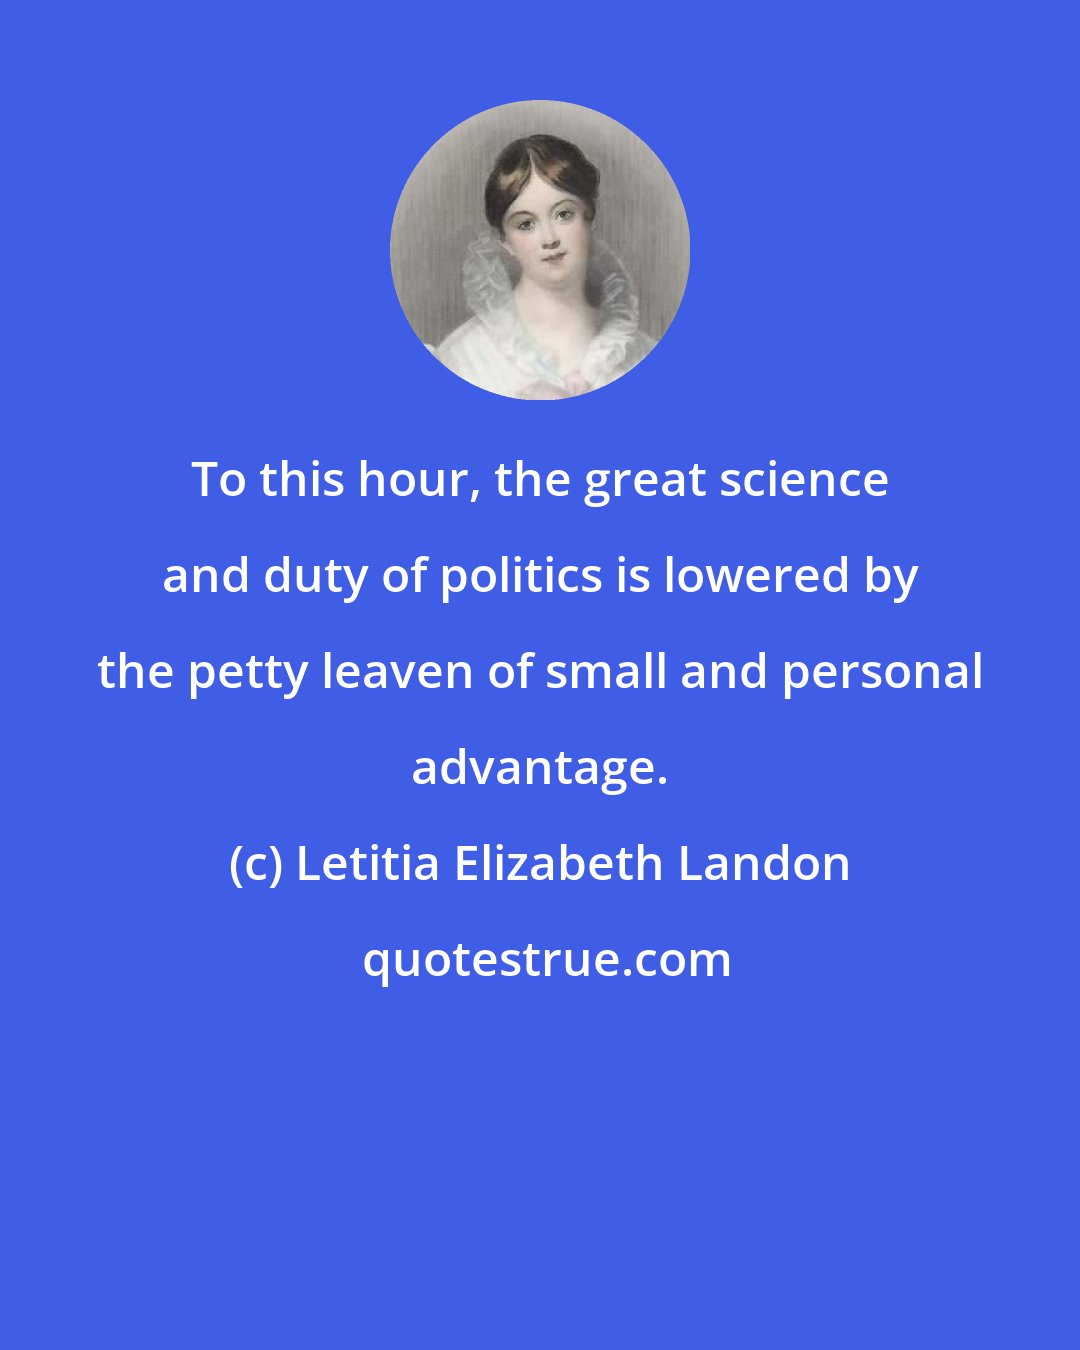 Letitia Elizabeth Landon: To this hour, the great science and duty of politics is lowered by the petty leaven of small and personal advantage.